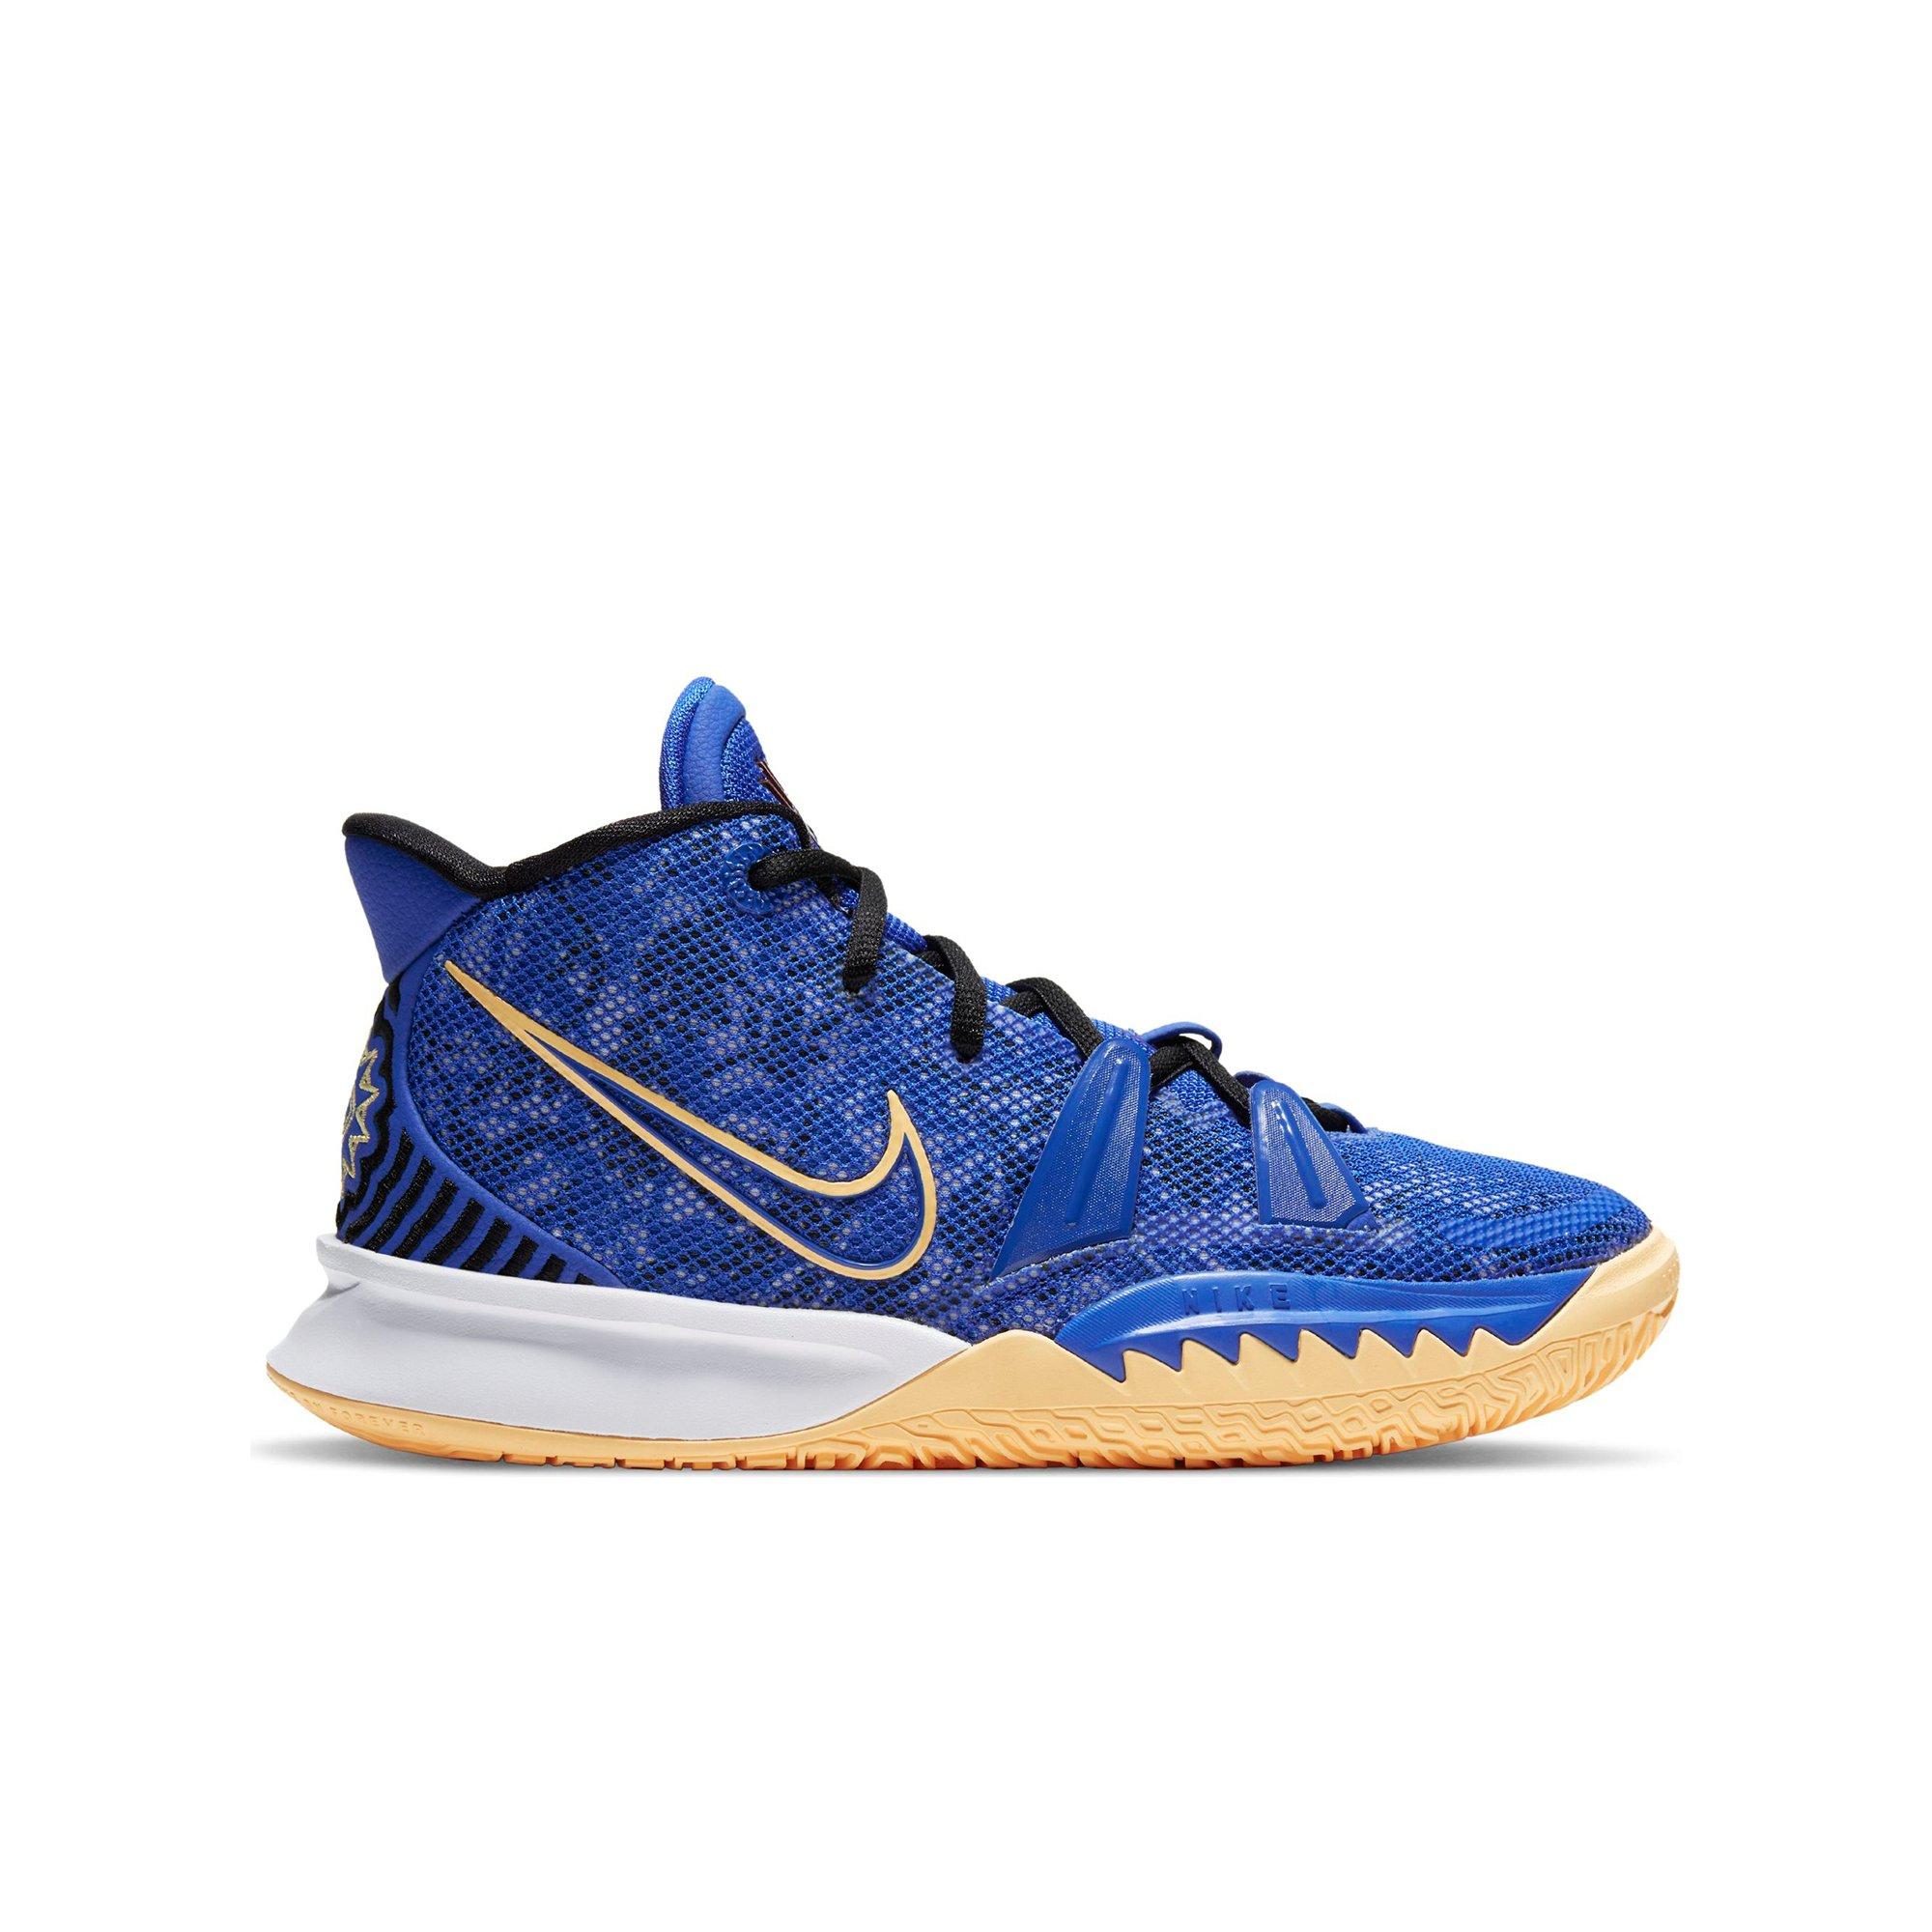 womens kyrie 5 basketball shoes